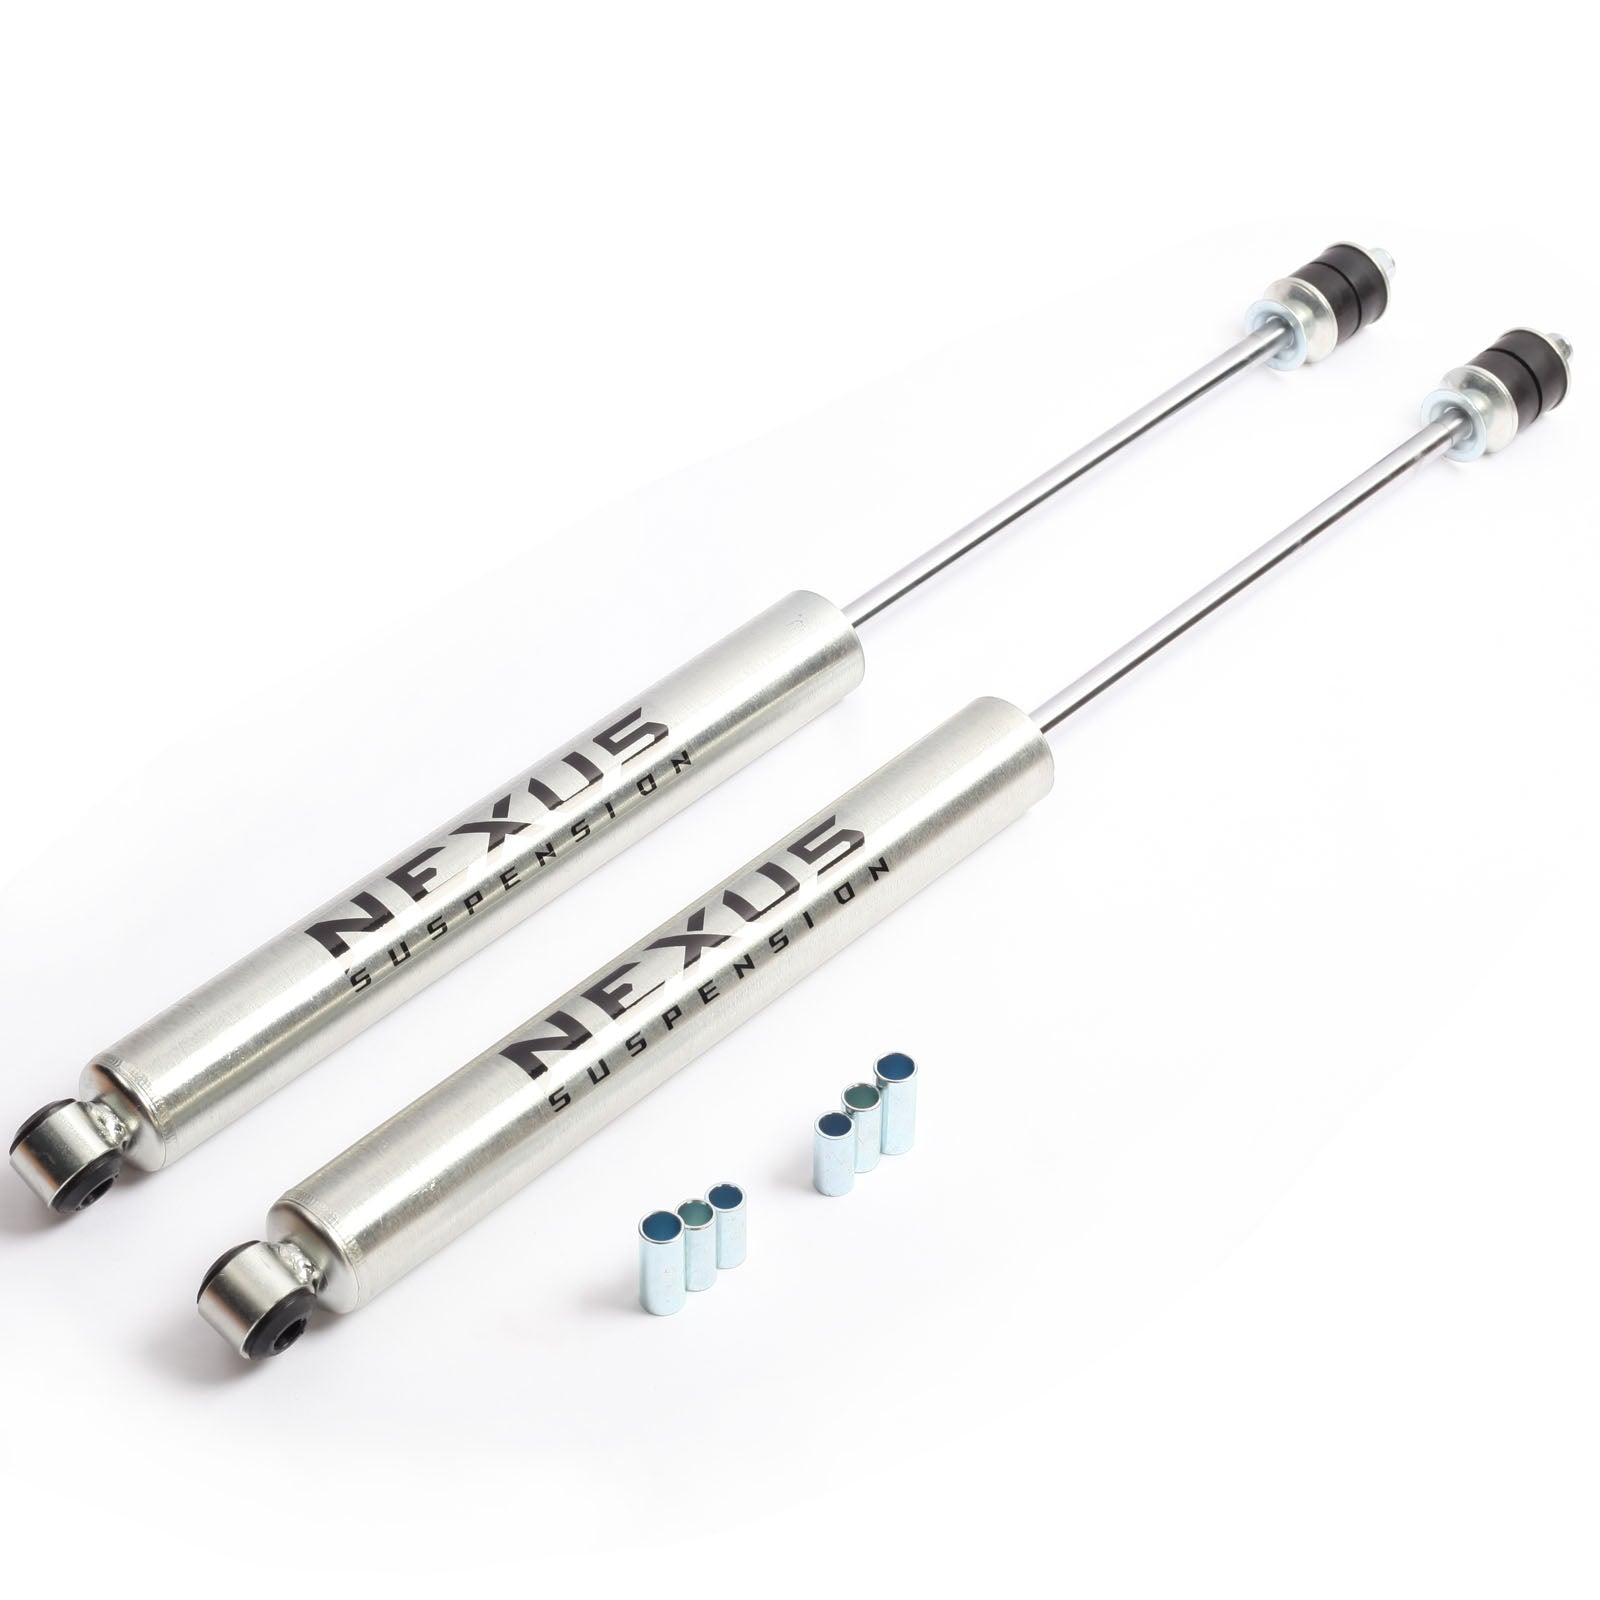 NEXUS SUSPENSION 4.5-6 Inch Lift Front Shock Absorber for Dodge Ram 3500 2003-2012,Zinc Plated Coating,Pair Pack